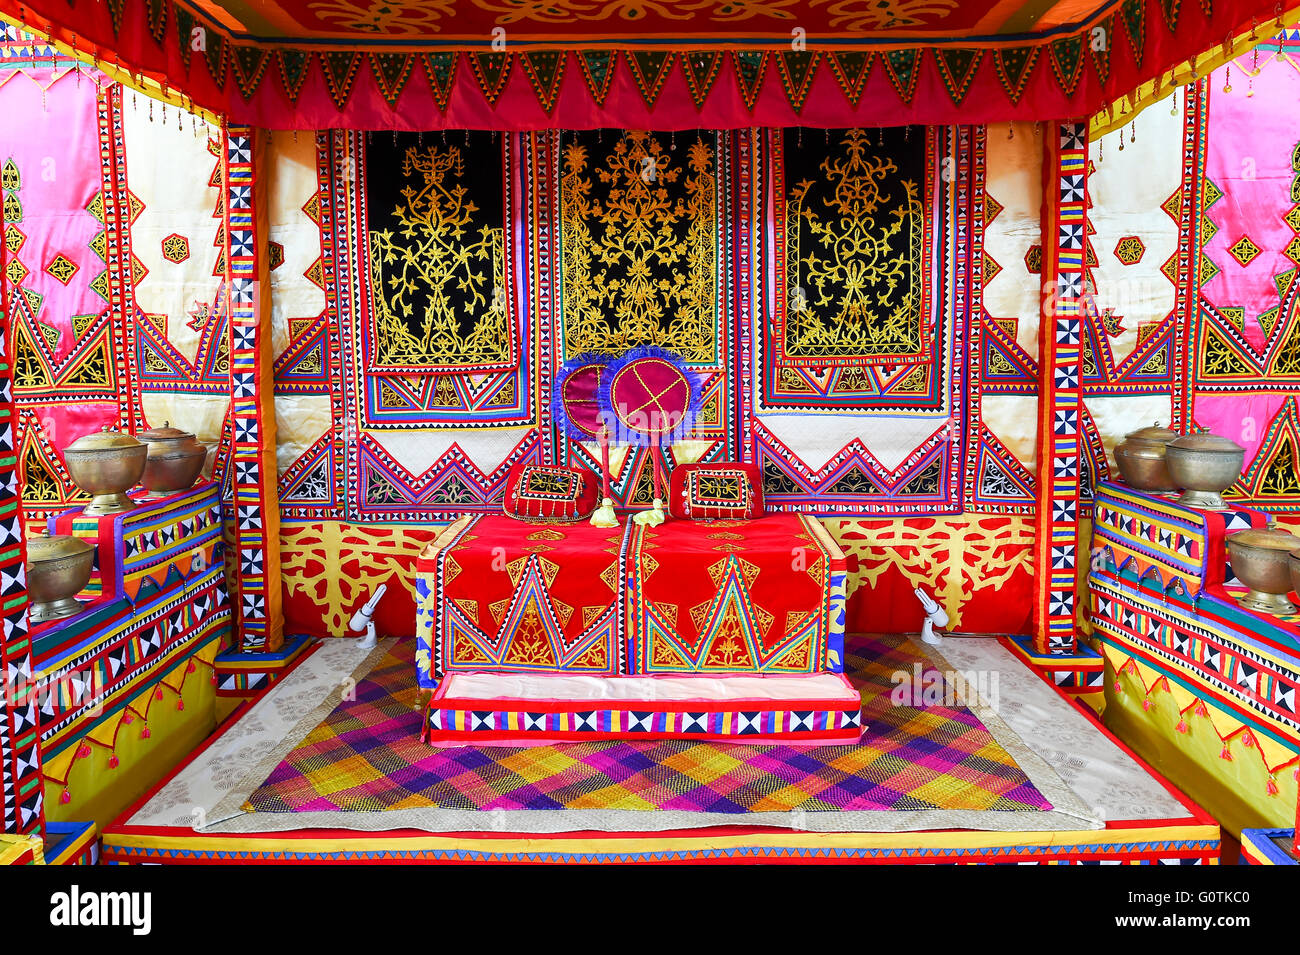 The ethnic Bajau of Borneo exotic and colourfull traditional bridal bed. Stock Photo